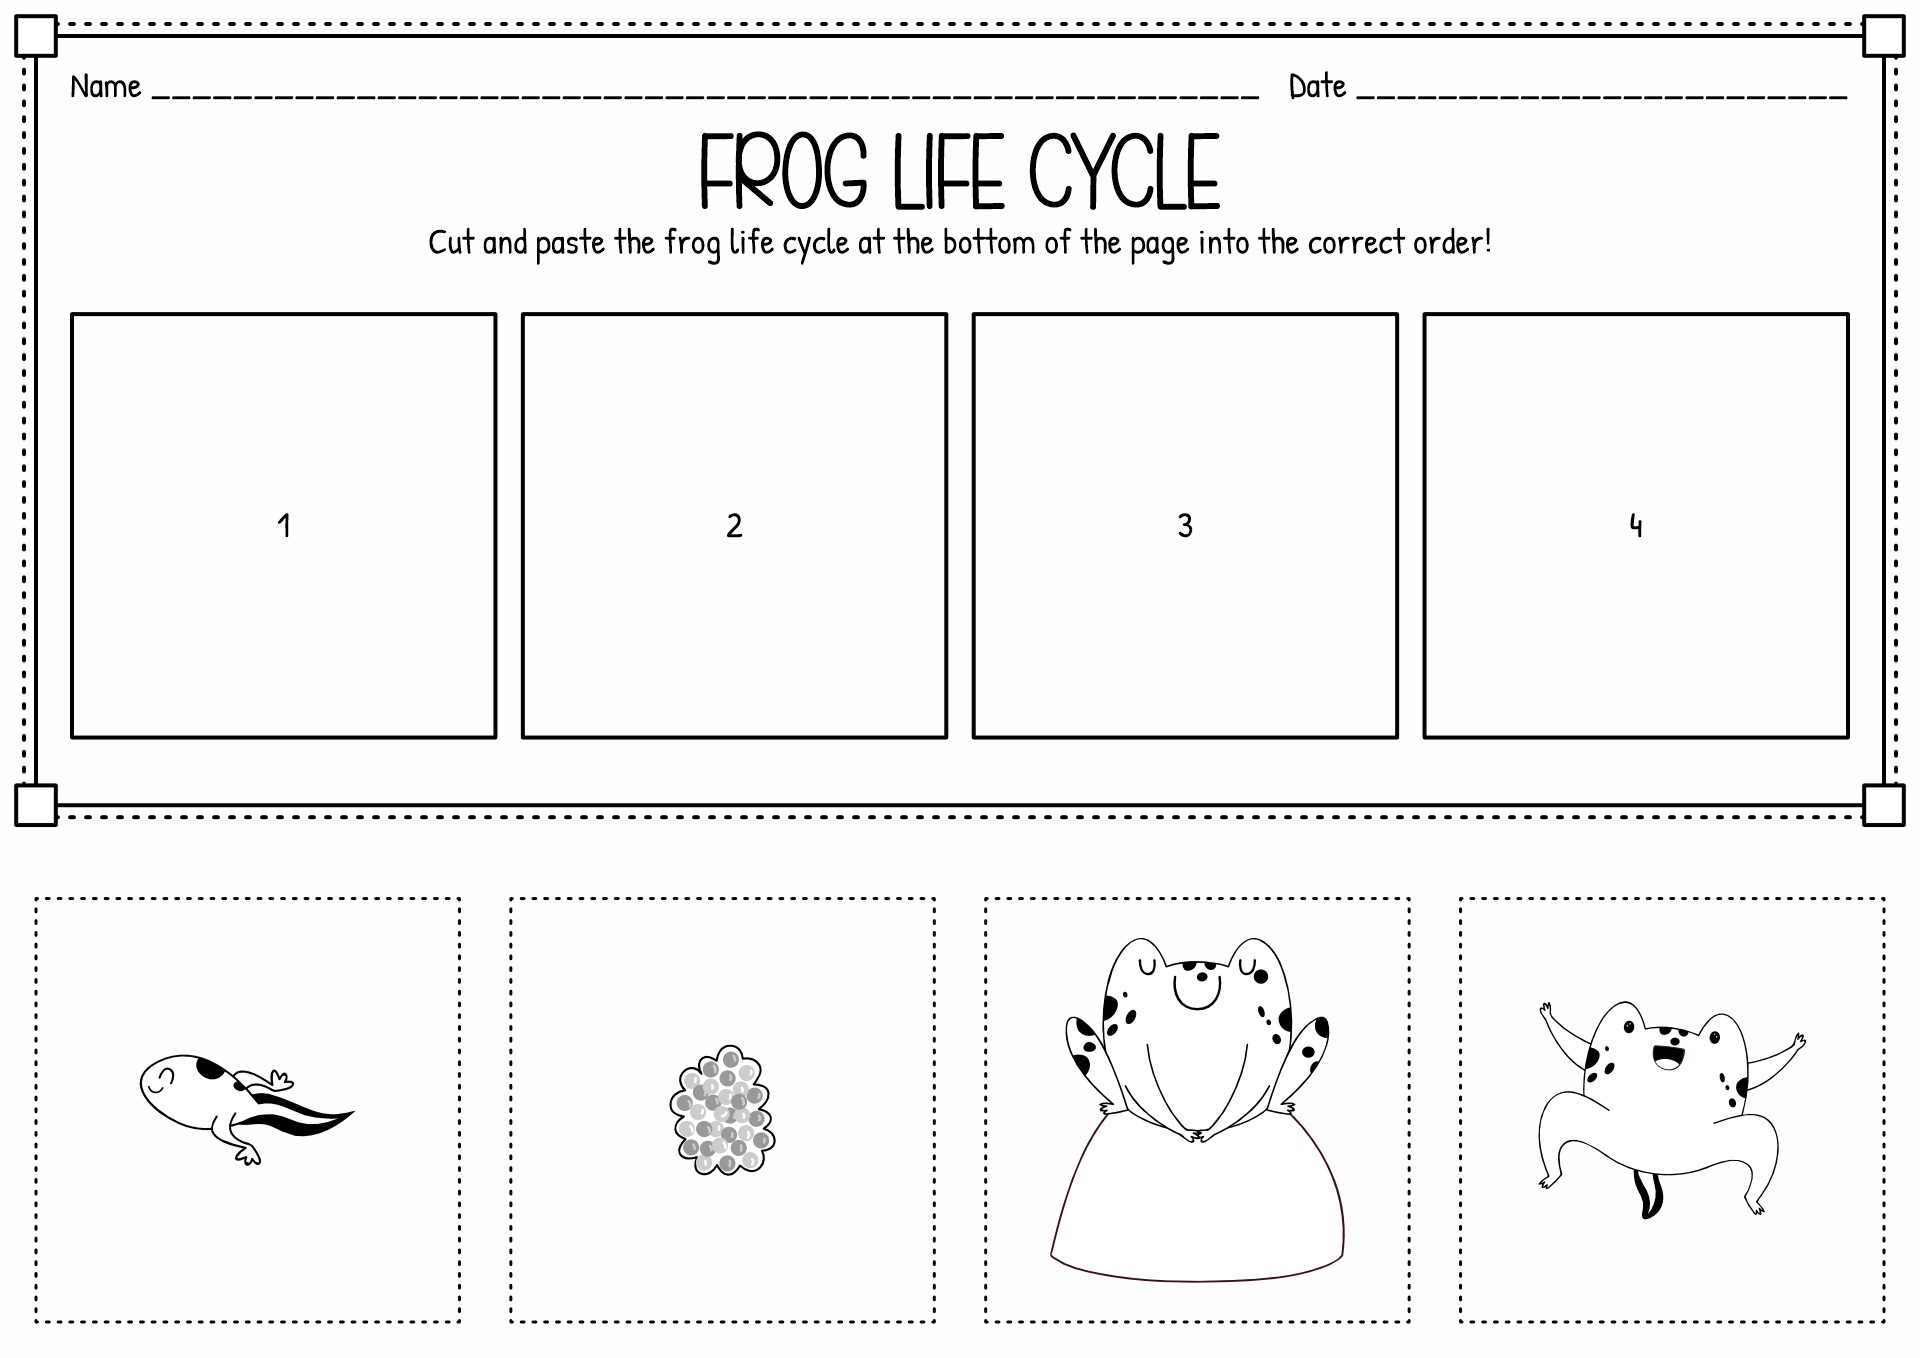 Frog Life Cycle Cut and Paste Image